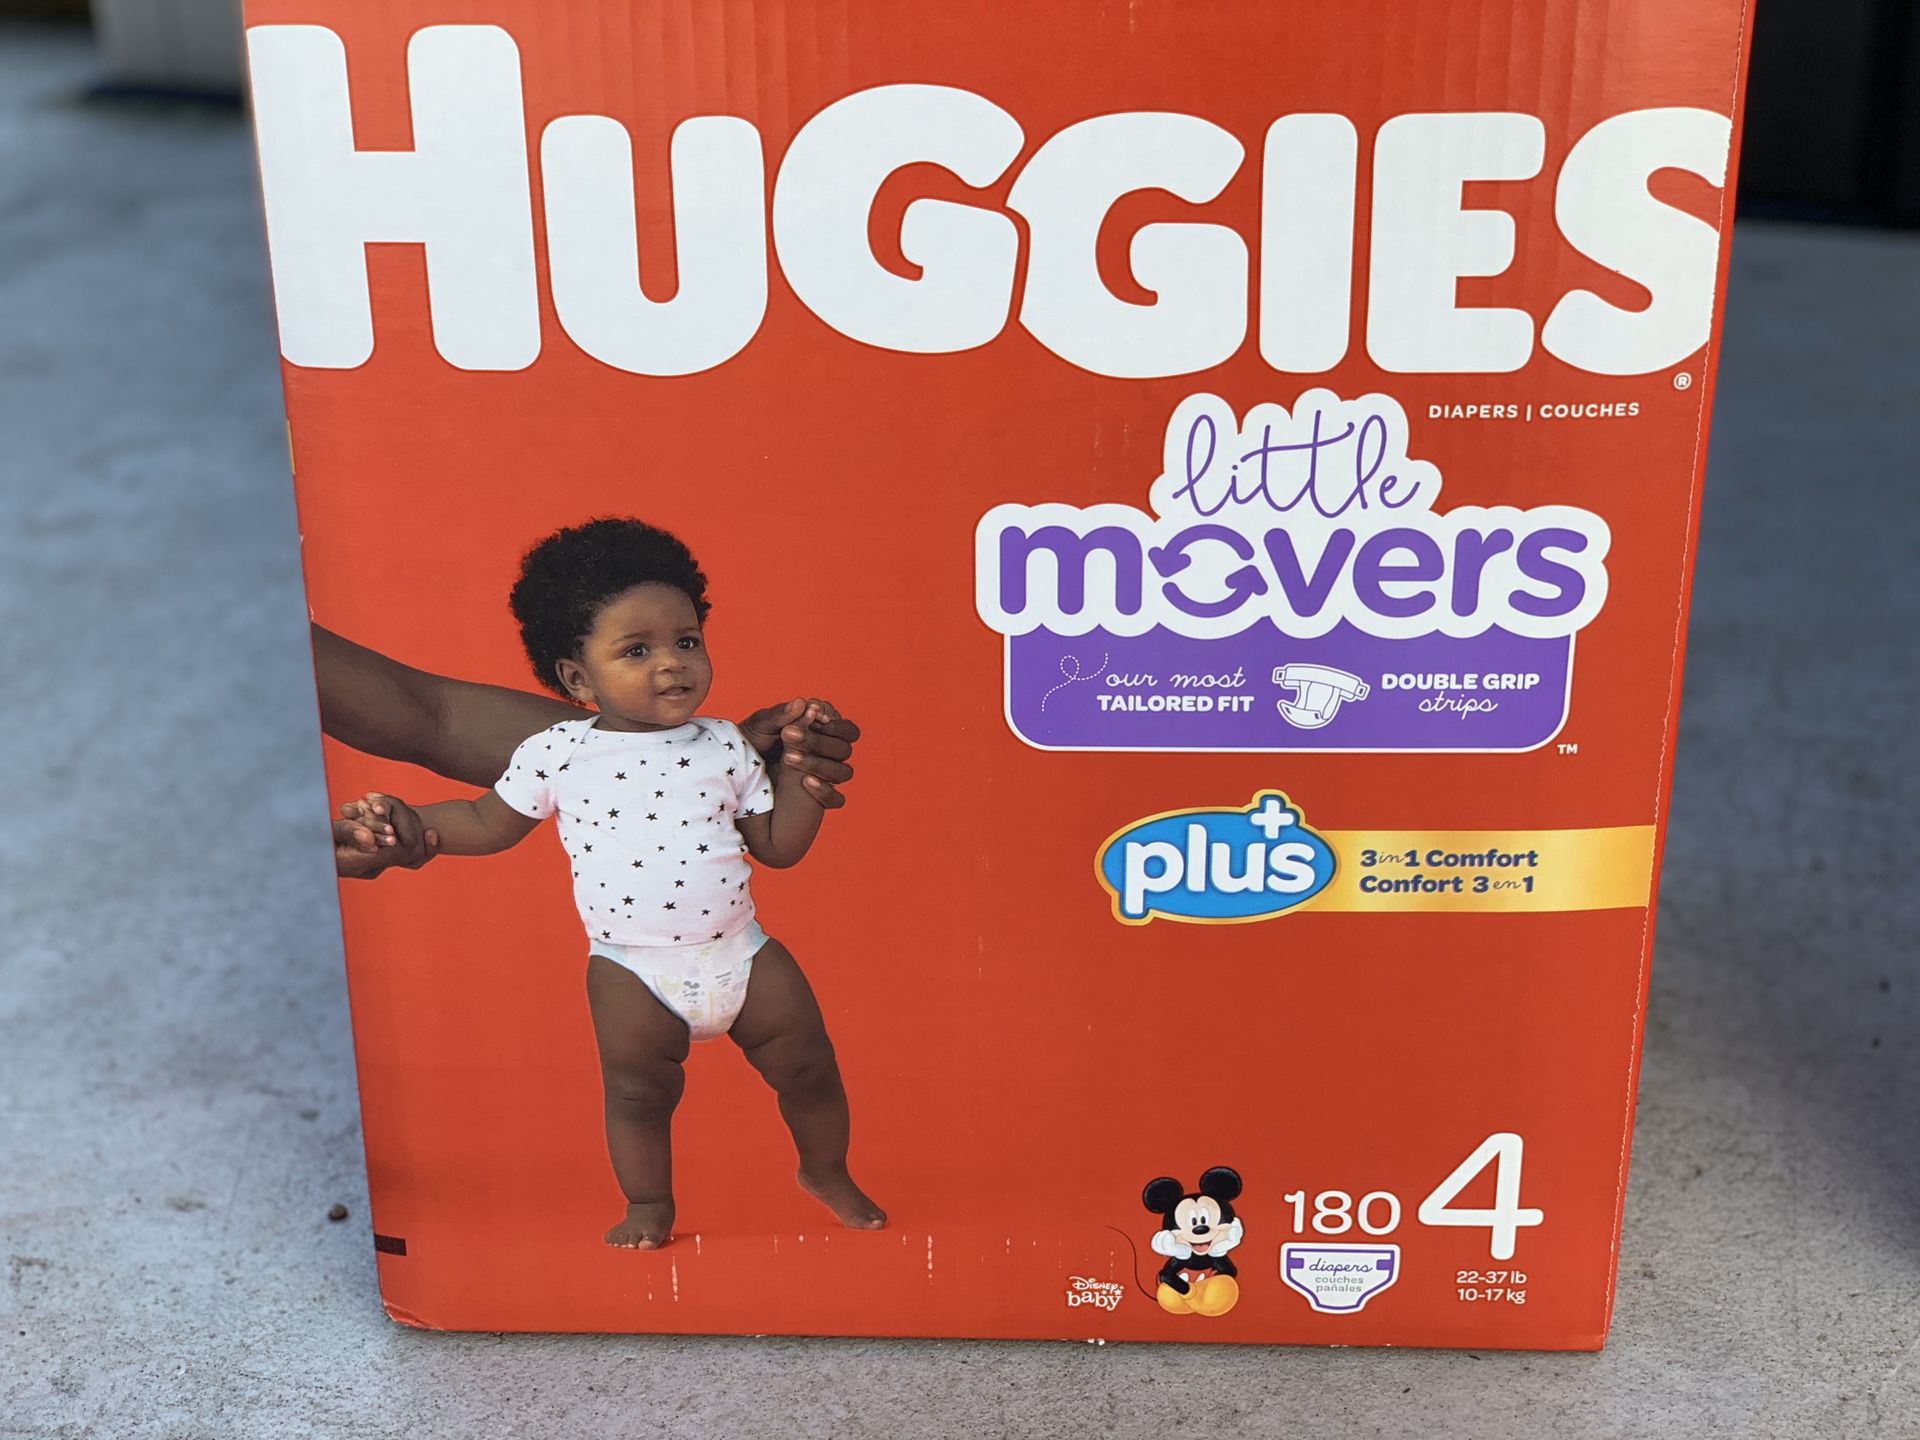 Huggies little movers size 4 (180) diapers